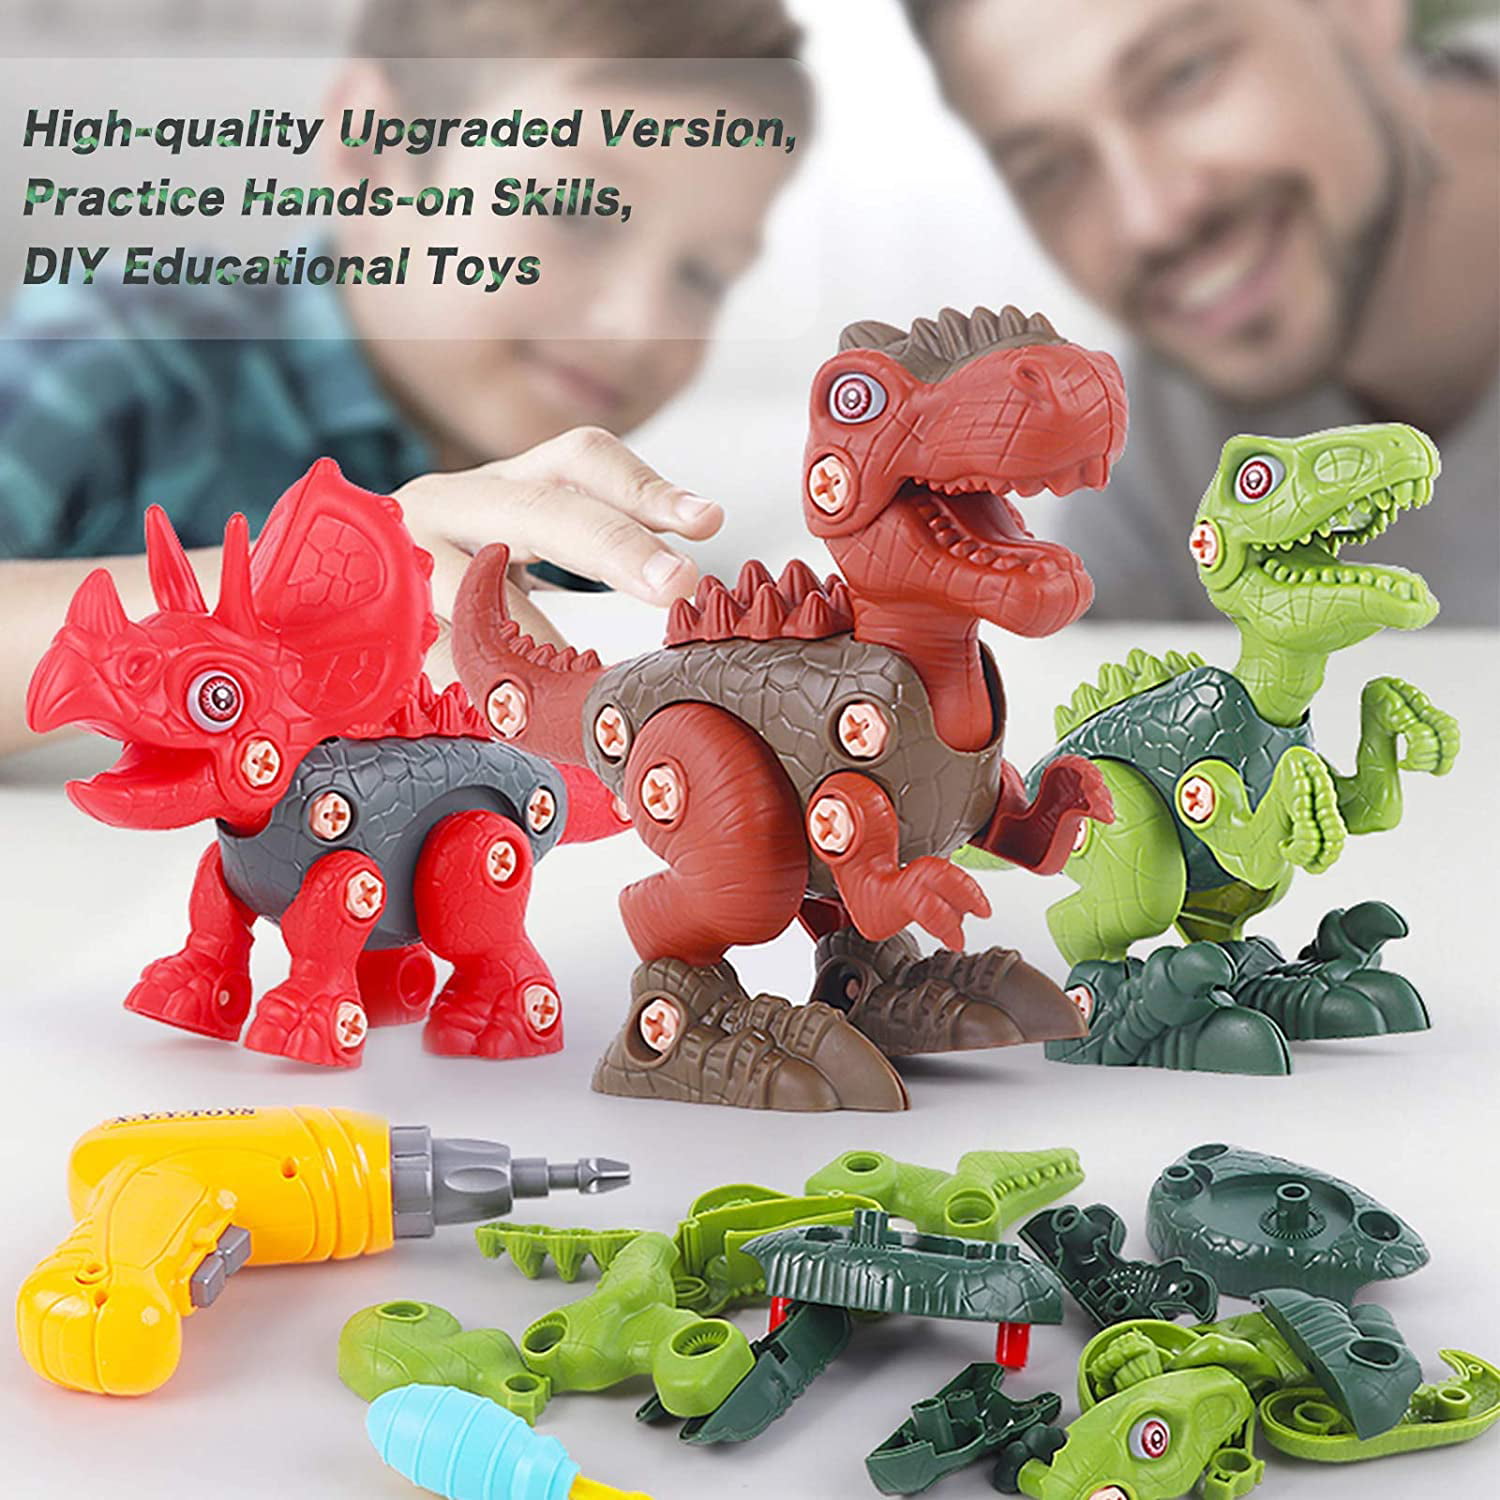 STEM Kids Toys for 3 4 5 6 7 Year Old Boys Girls Birthday Easter Gifts 6600-1 SZJJX Take Apart Dinosaur Toys for Kids 3-5 Dinosaurs Construction Building Toy Set with Electric Drill 